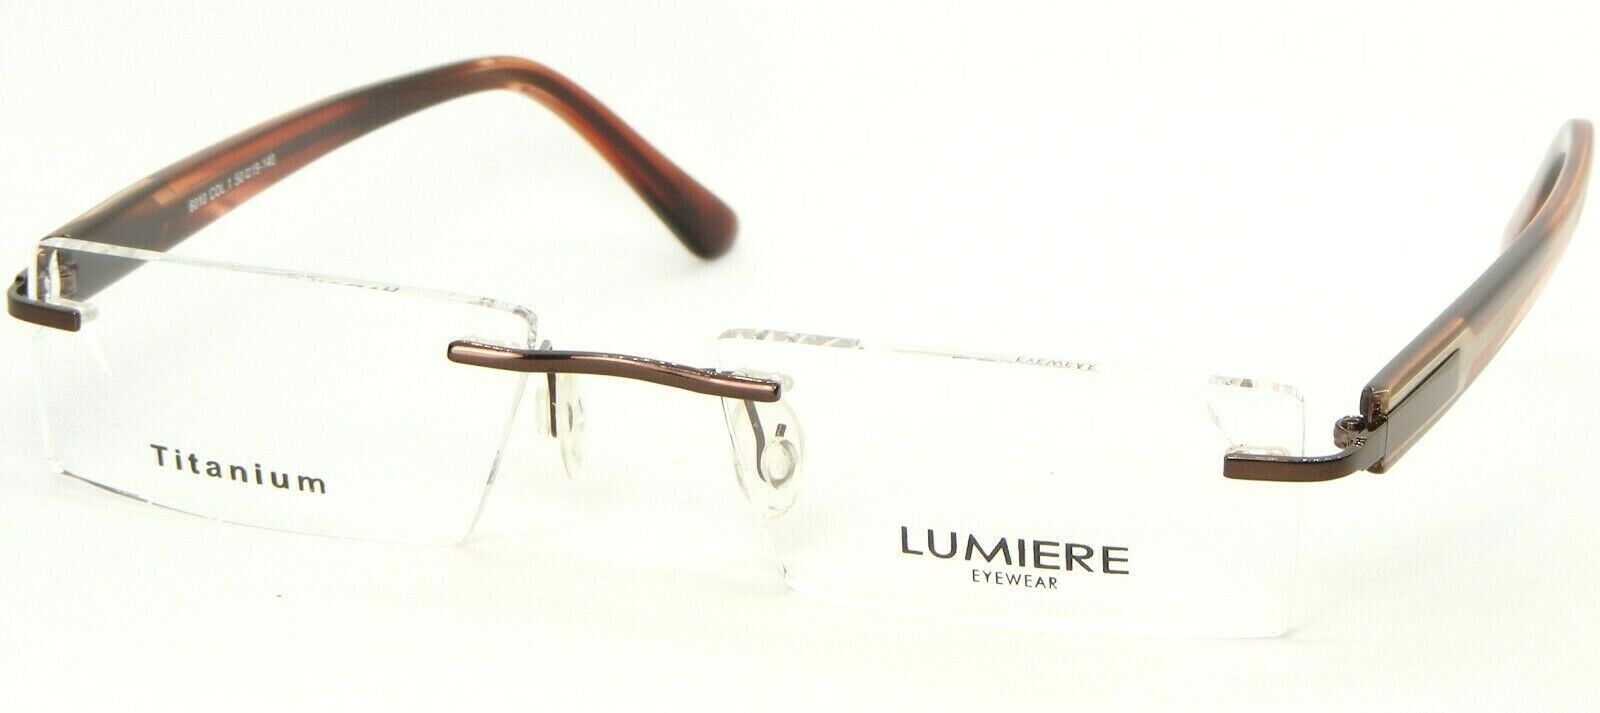 Primary image for LUMIERE EYEWEAR ITALY 6010 COL.1 BROWN EYEGLASSES GLASSES 50-19-140 mm (NOTES)